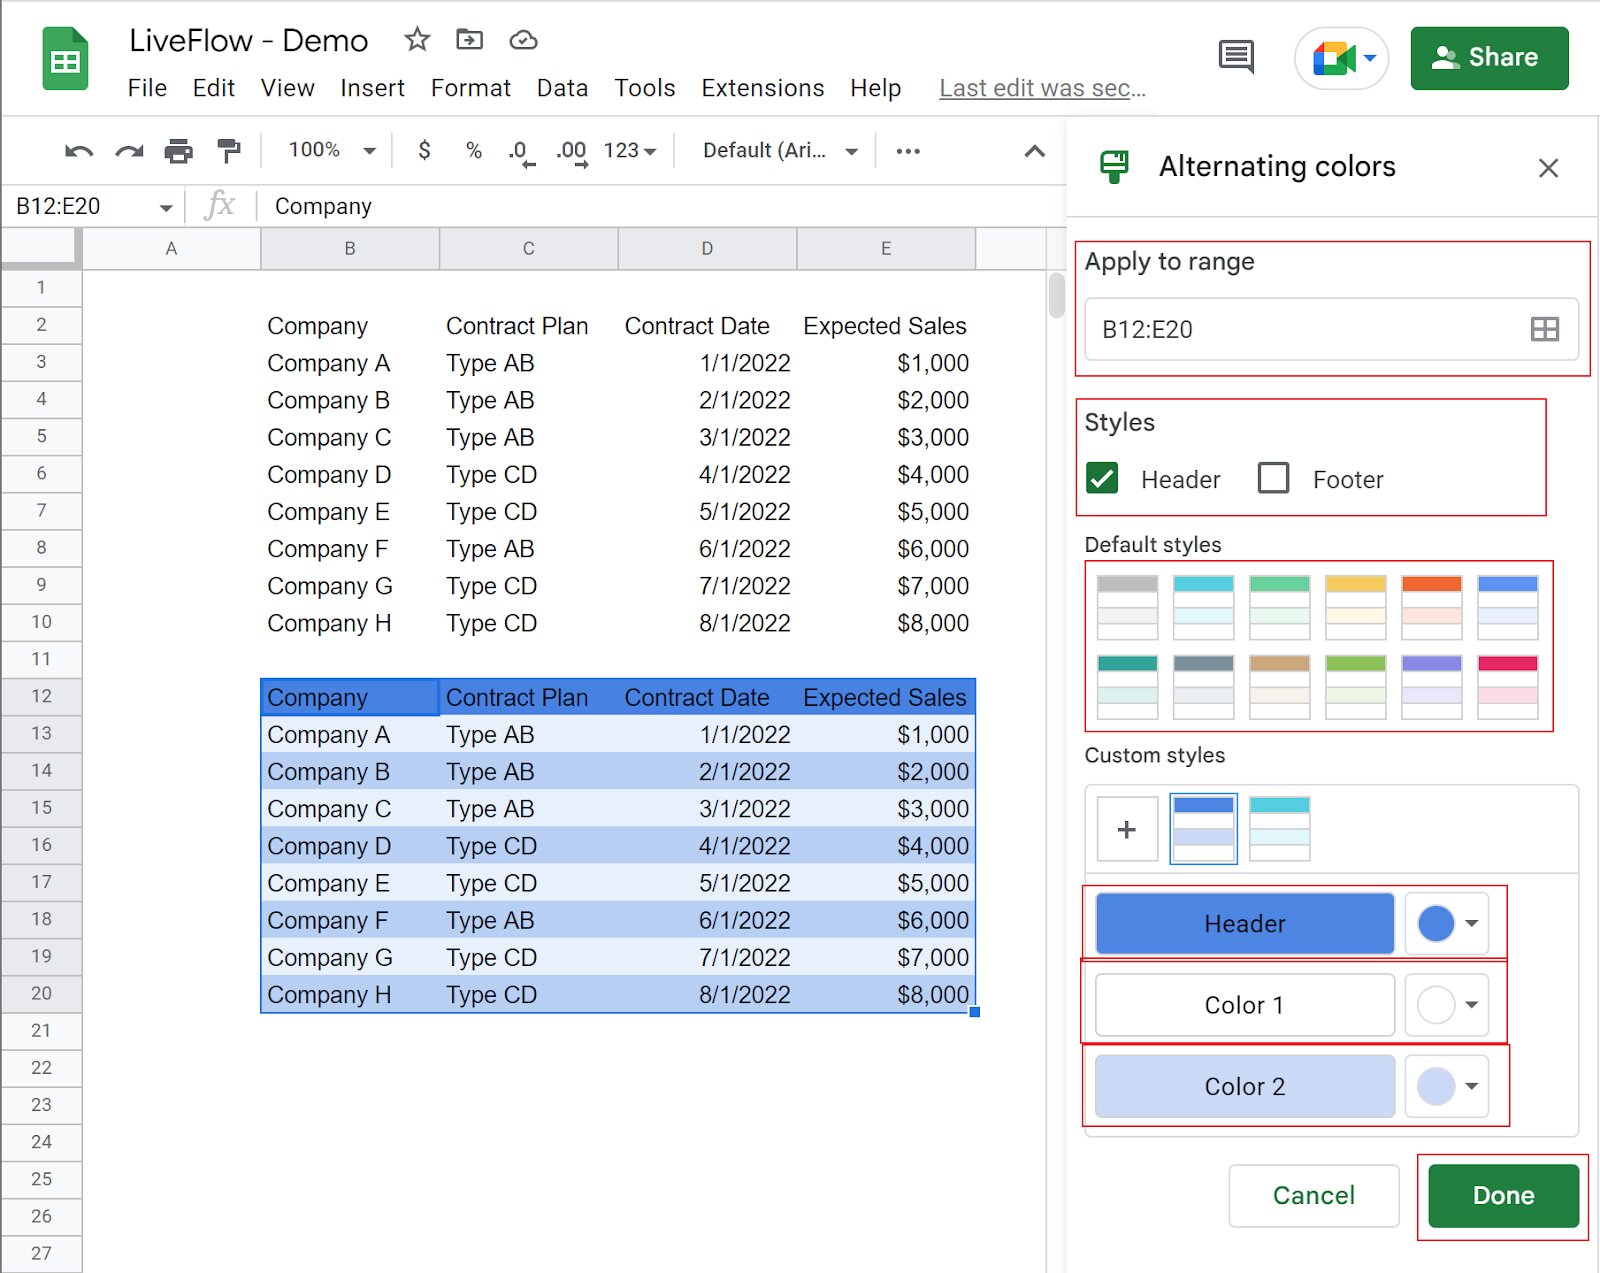 How To Make Alternating Colors In Google Sheets